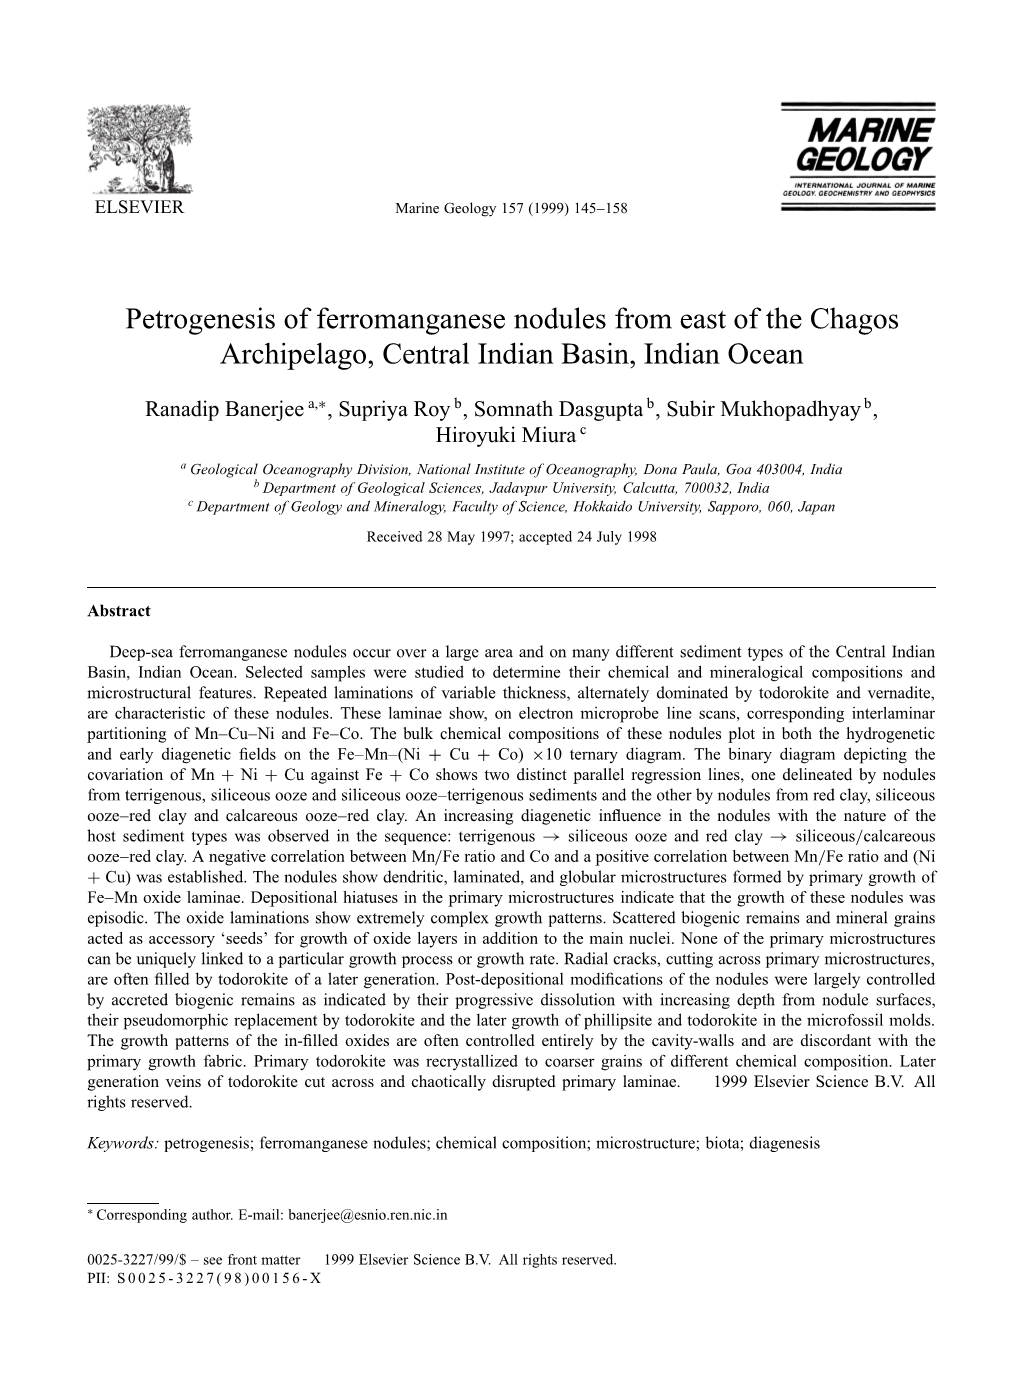 Petrogenesis of Ferromanganese Nodules from East of the Chagos Archipelago, Central Indian Basin, Indian Ocean